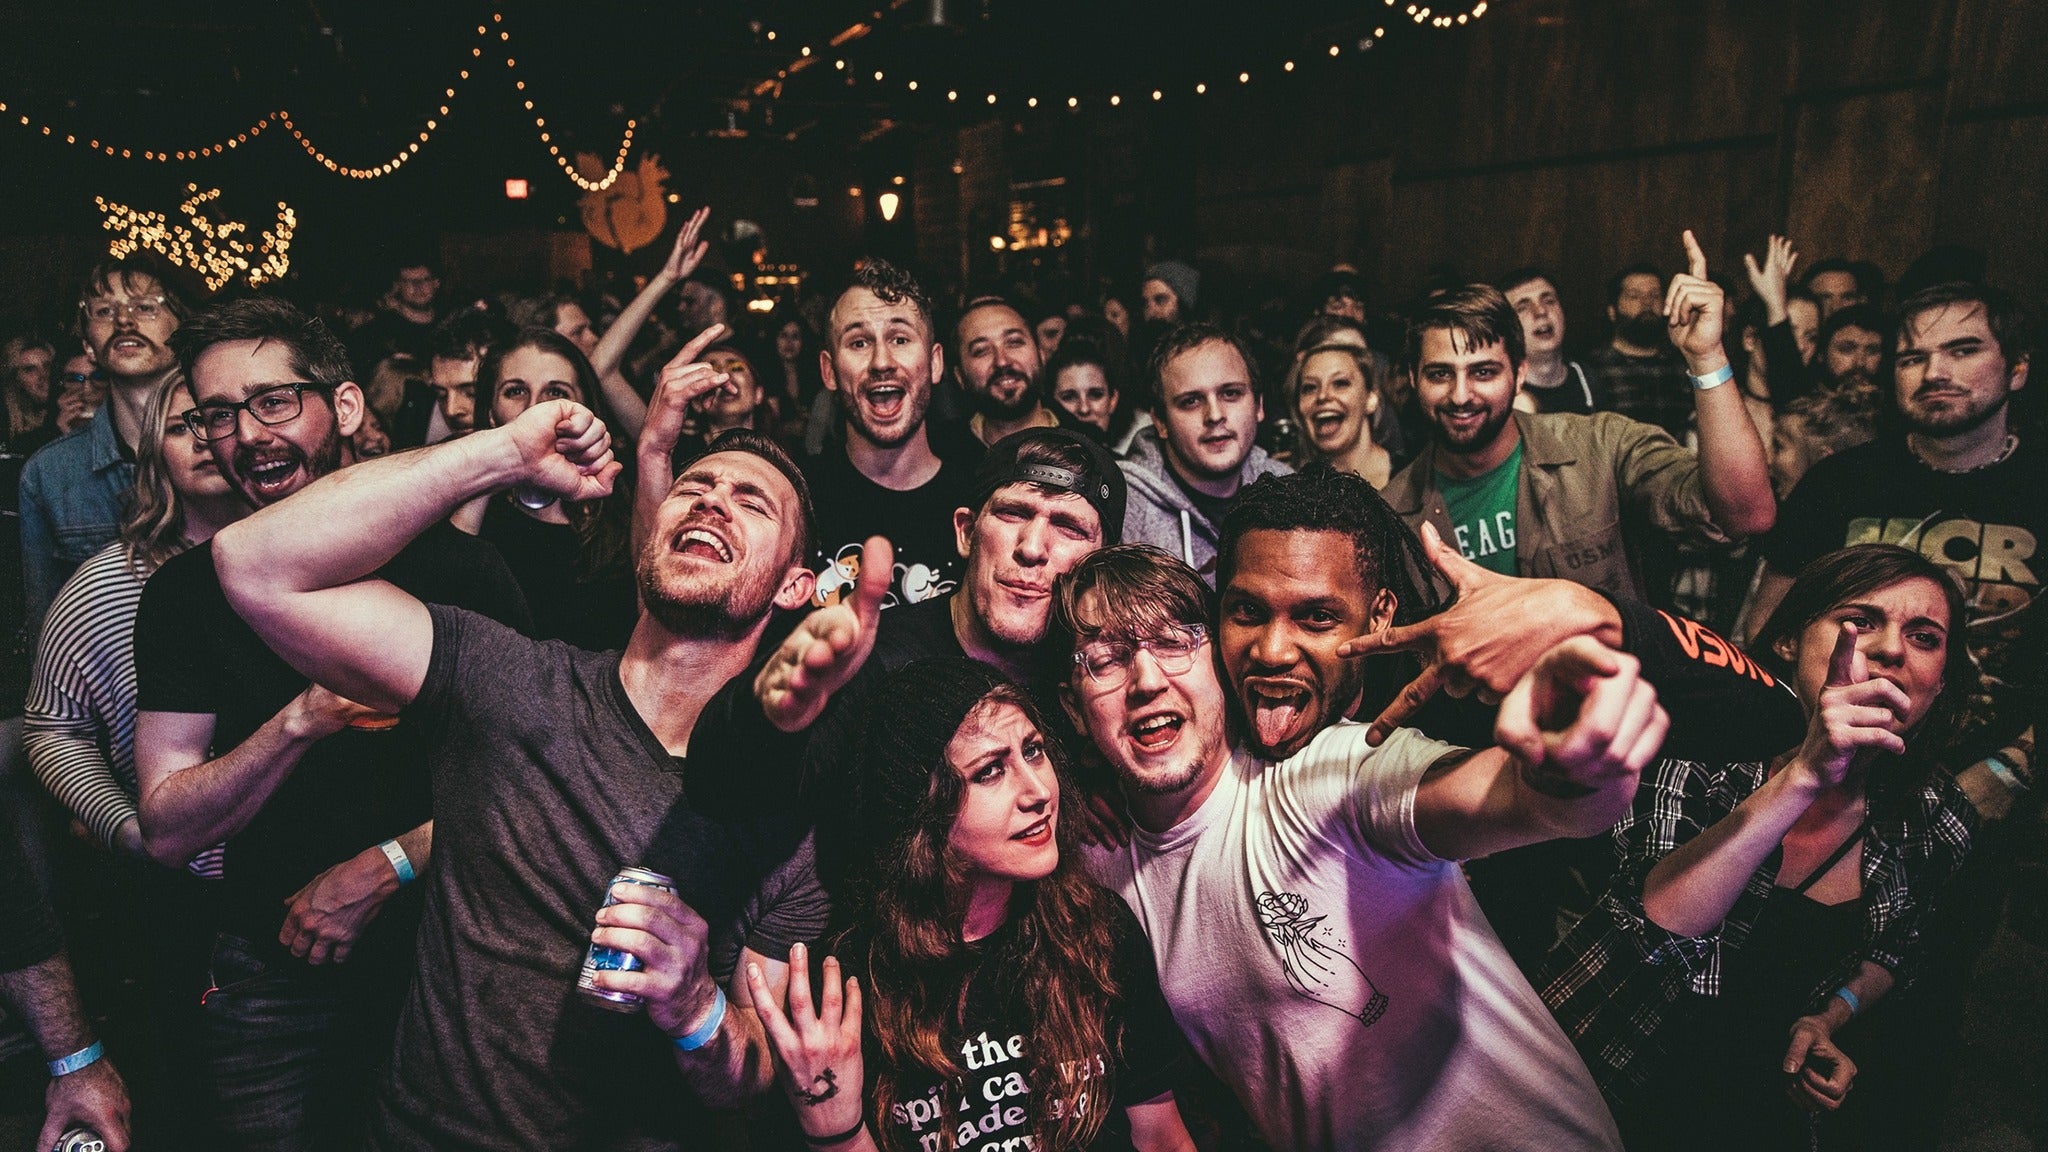 THE EMO BAND: Emo + Pop Punk Live Band Karaoke Party (21+) presale password for show tickets in Pittsburgh, PA (Spirit Hall)